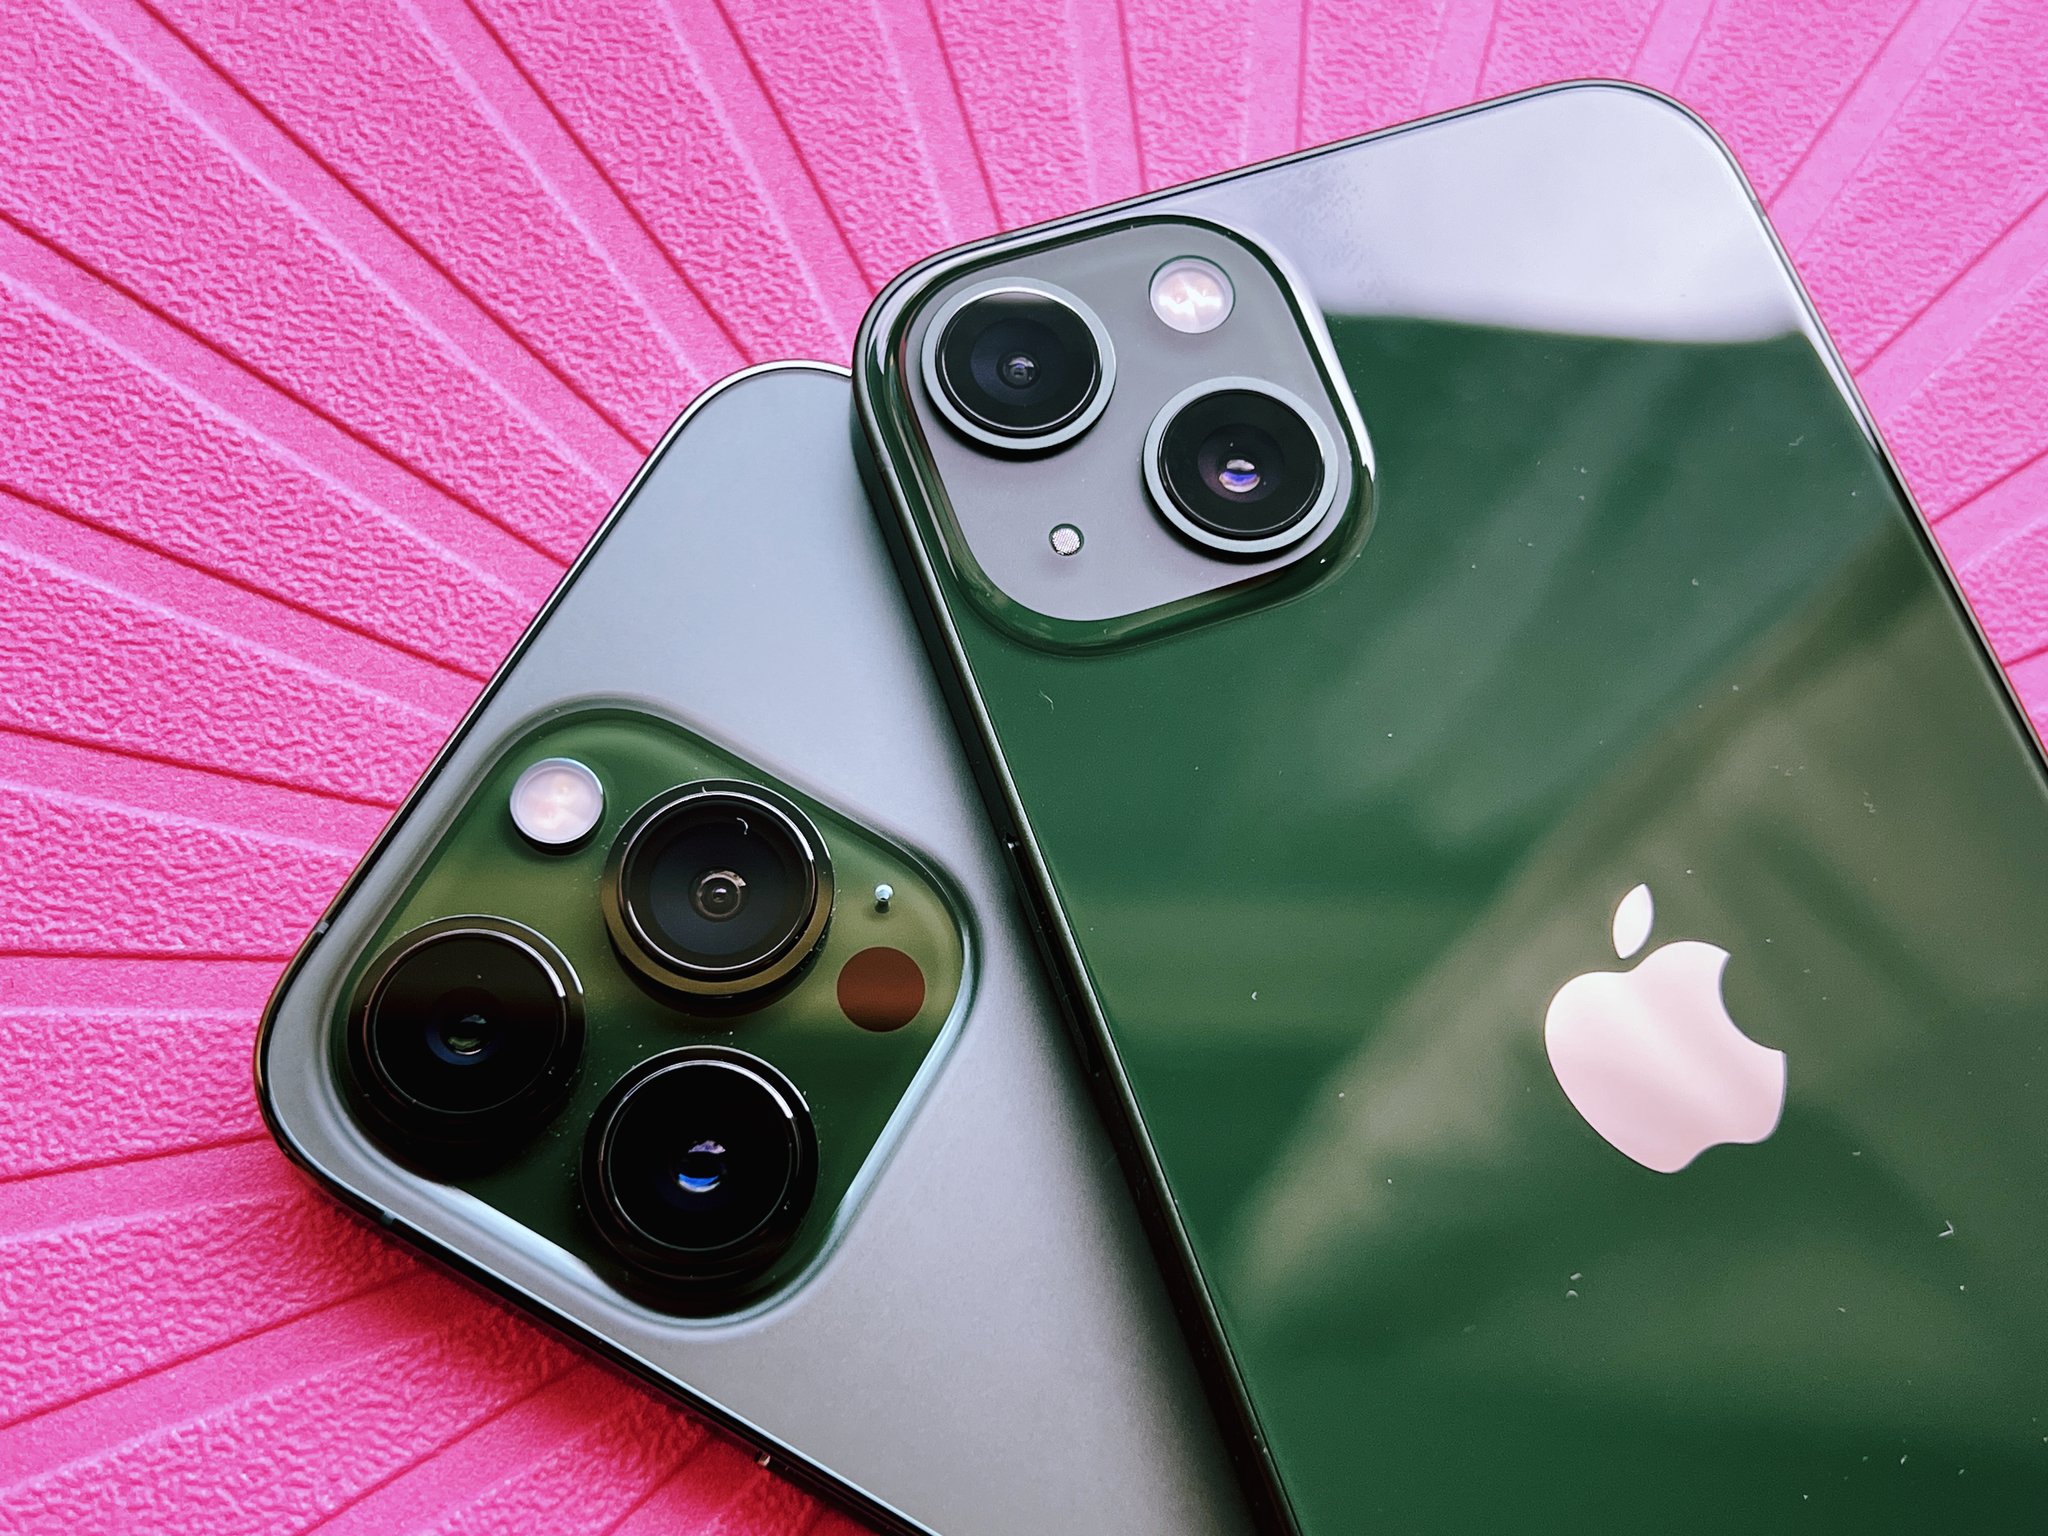 Apple might have a supplier lined up for a future periscope iPhone camera